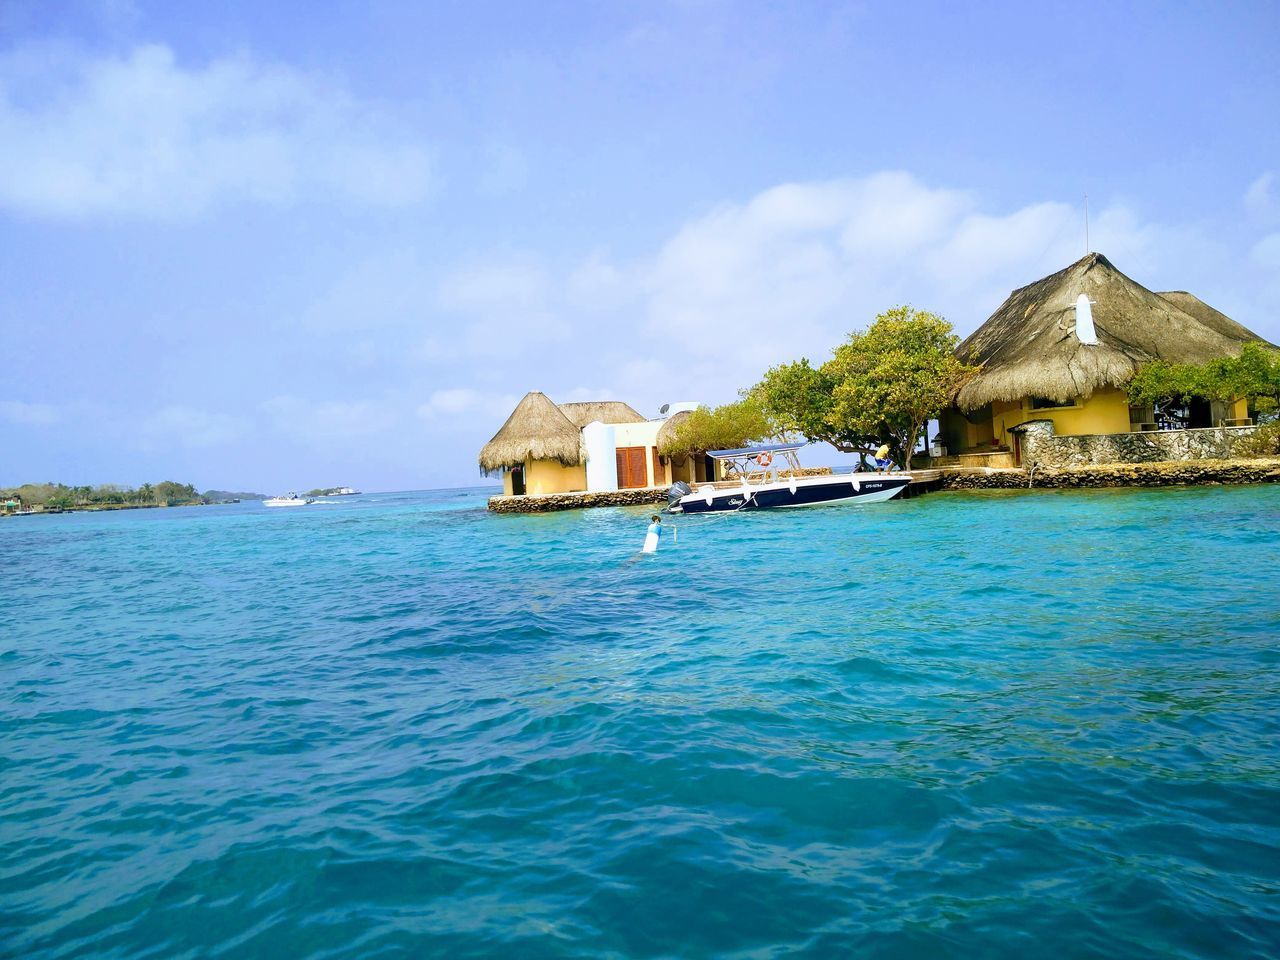 water, thatched roof, scenics, built structure, sky, waterfront, hut, architecture, sea, beauty in nature, house, tranquility, outdoors, tranquil scene, stilt house, nature, building exterior, idyllic, day, no people, blue, luxury, holiday villa